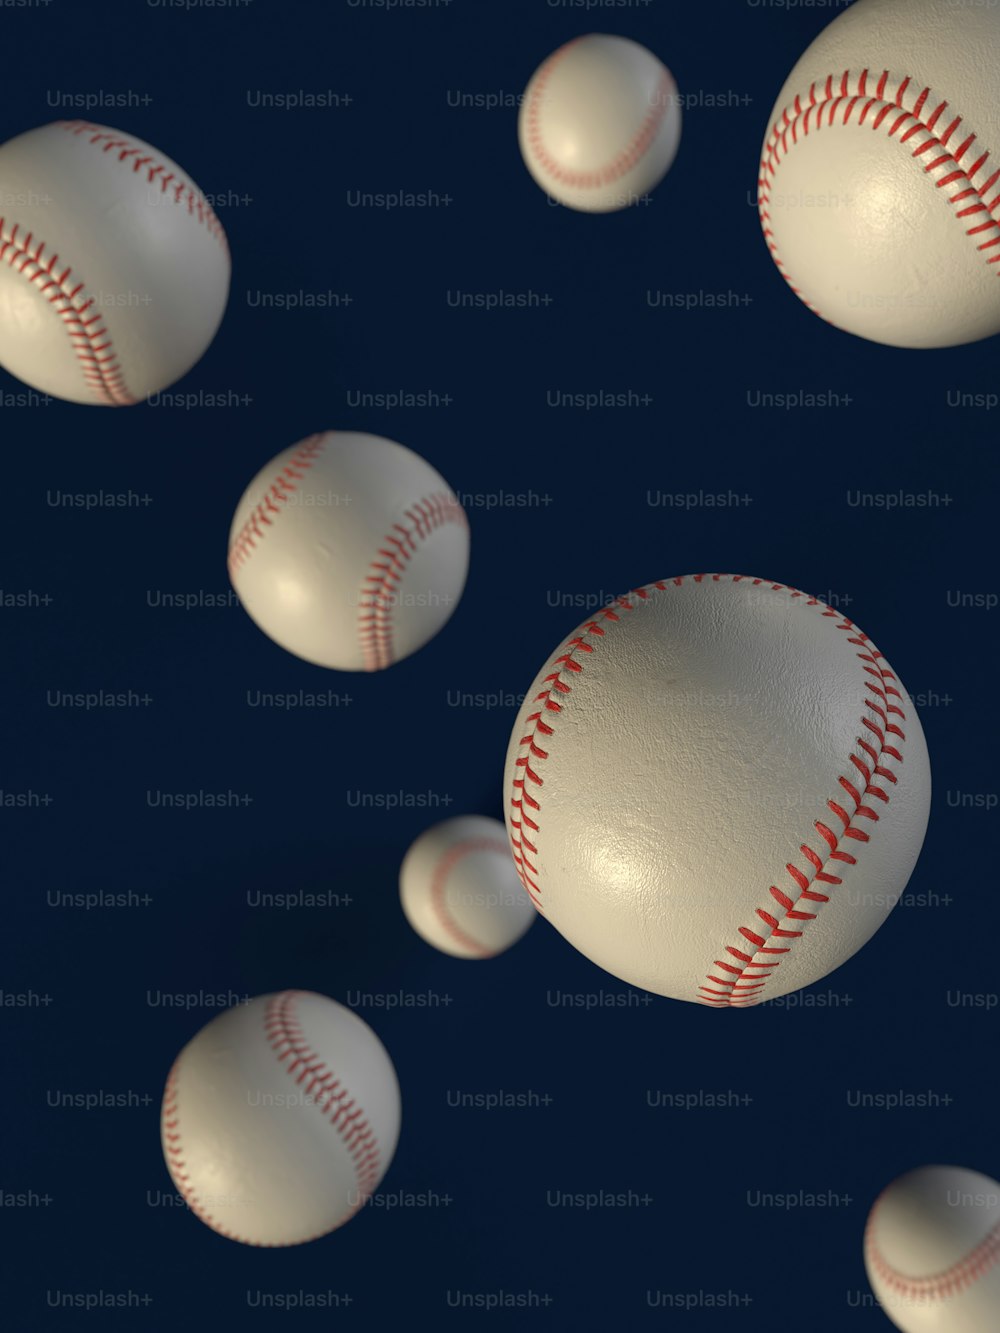 a group of baseballs flying through the air